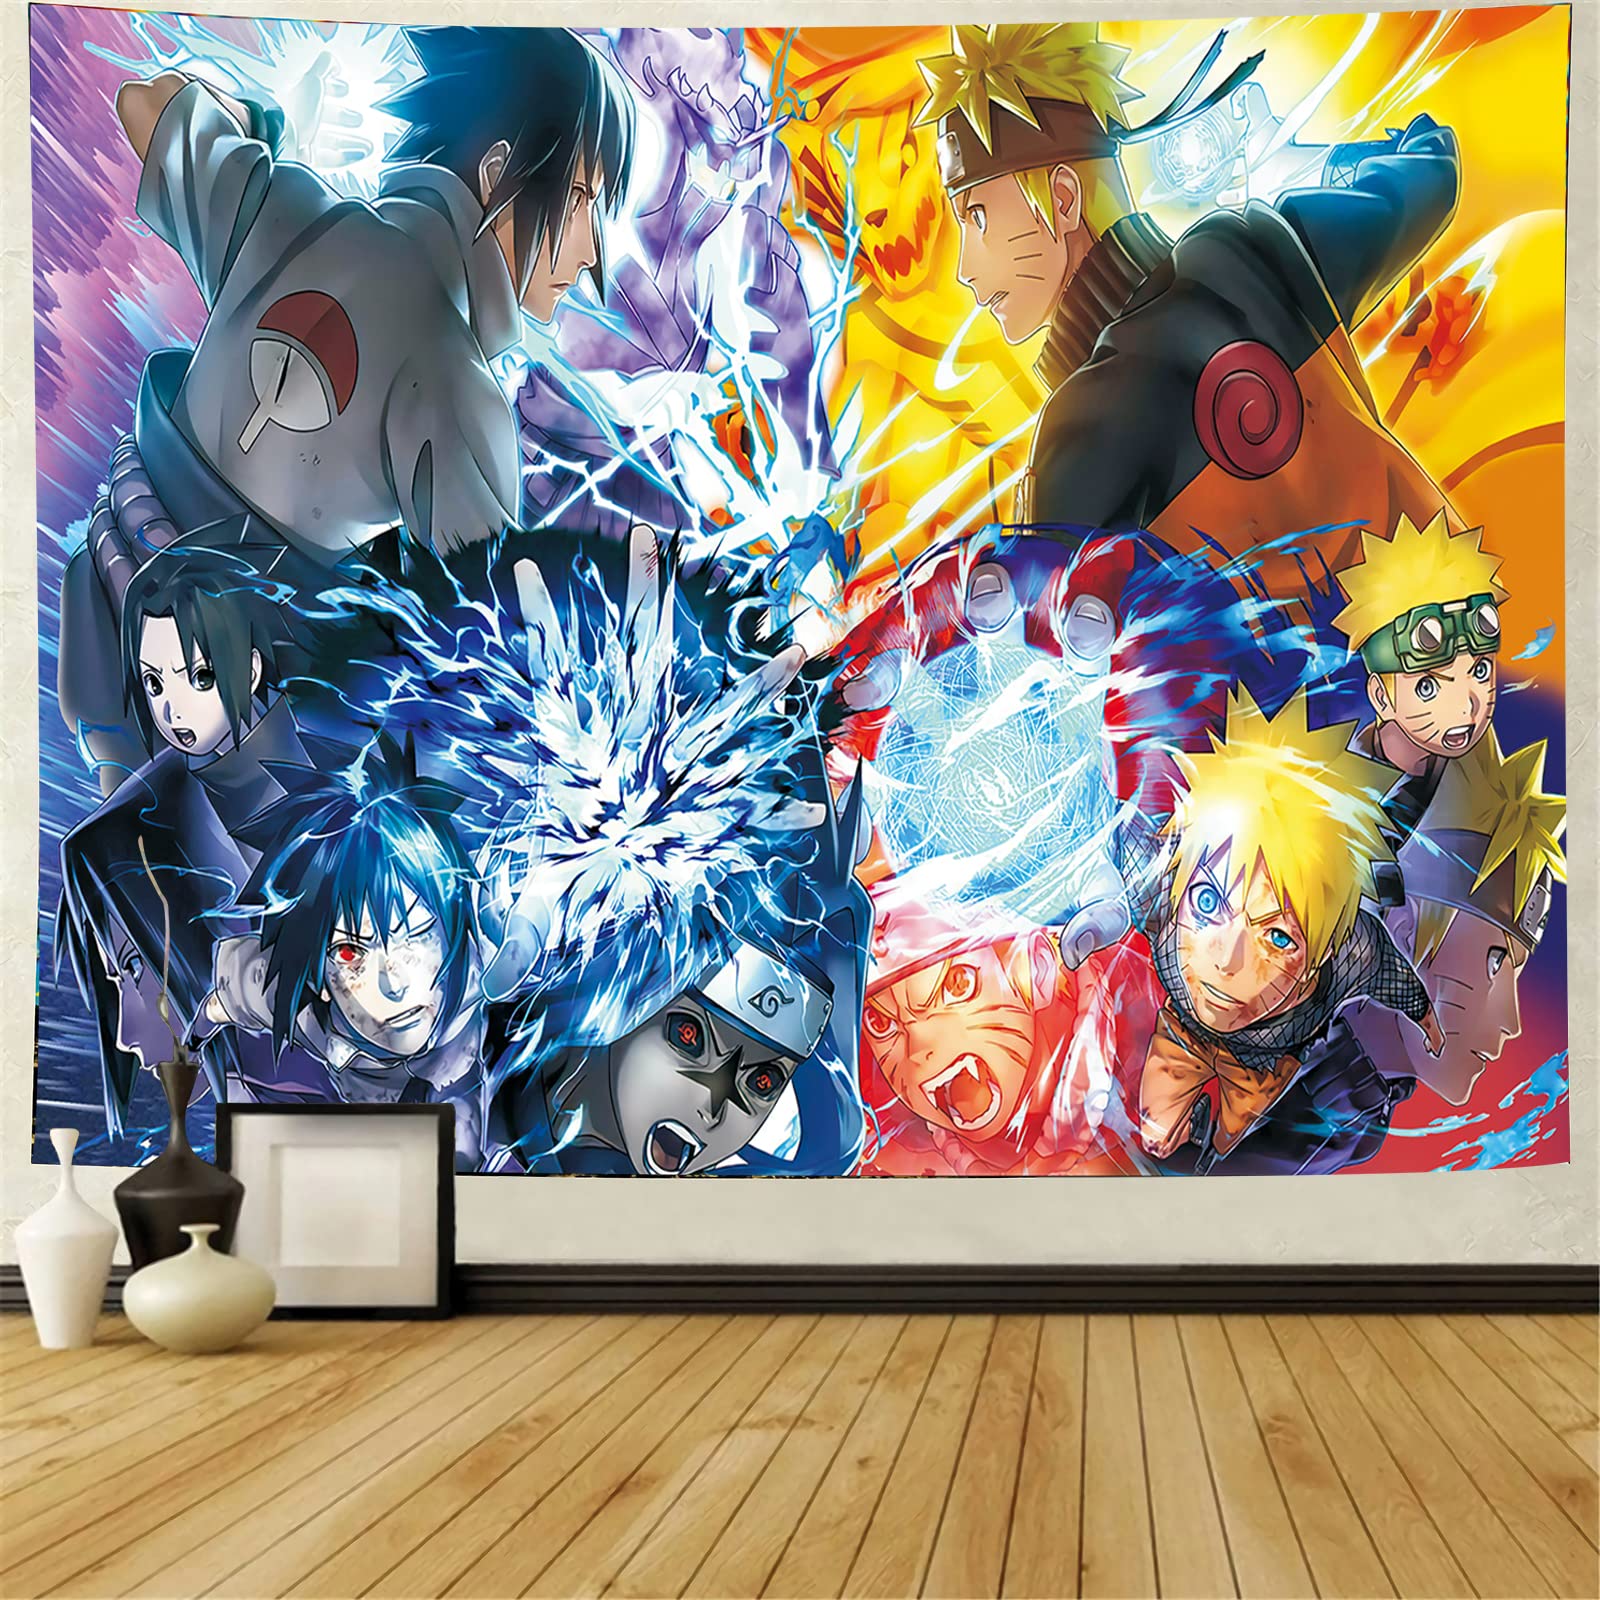 How to decorate your room anime style - 75 photo